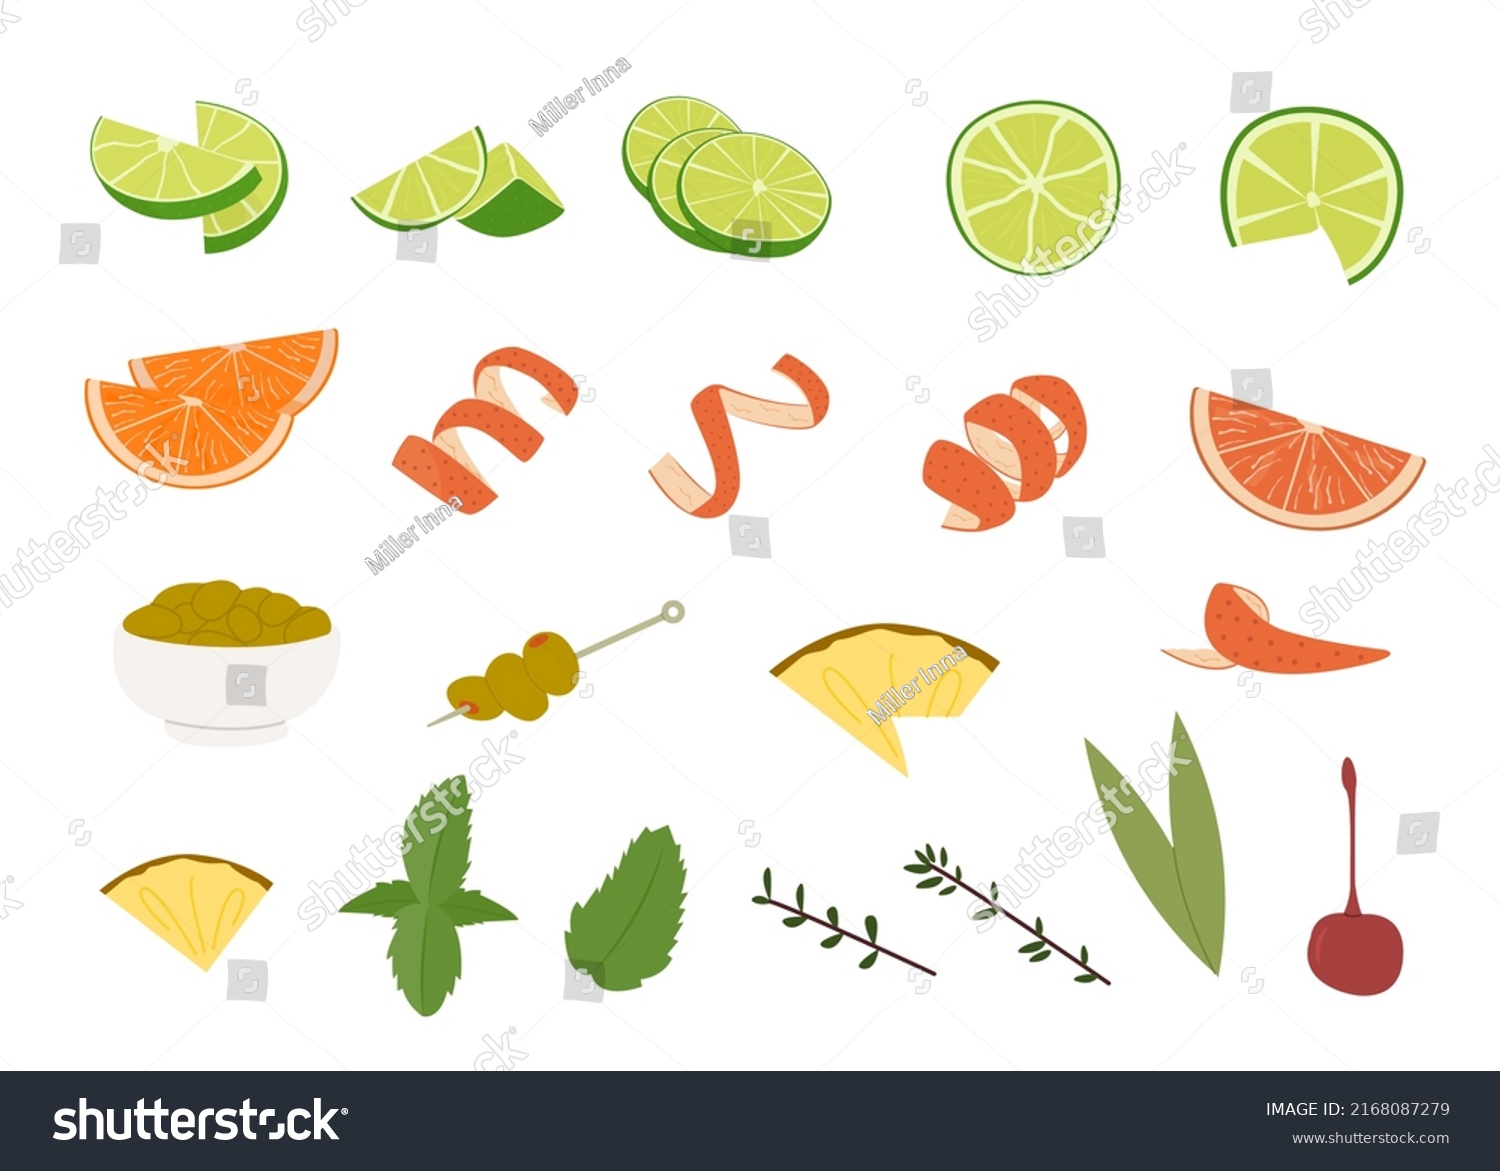 SVG of Various alcohol cocktail garnishes. Lime slices, orange wedge and twist, olives skewer, cutted pineapple, mint twig, herb leaf, maschietto cherry and rosemary. Vector illustration isolated on white. svg